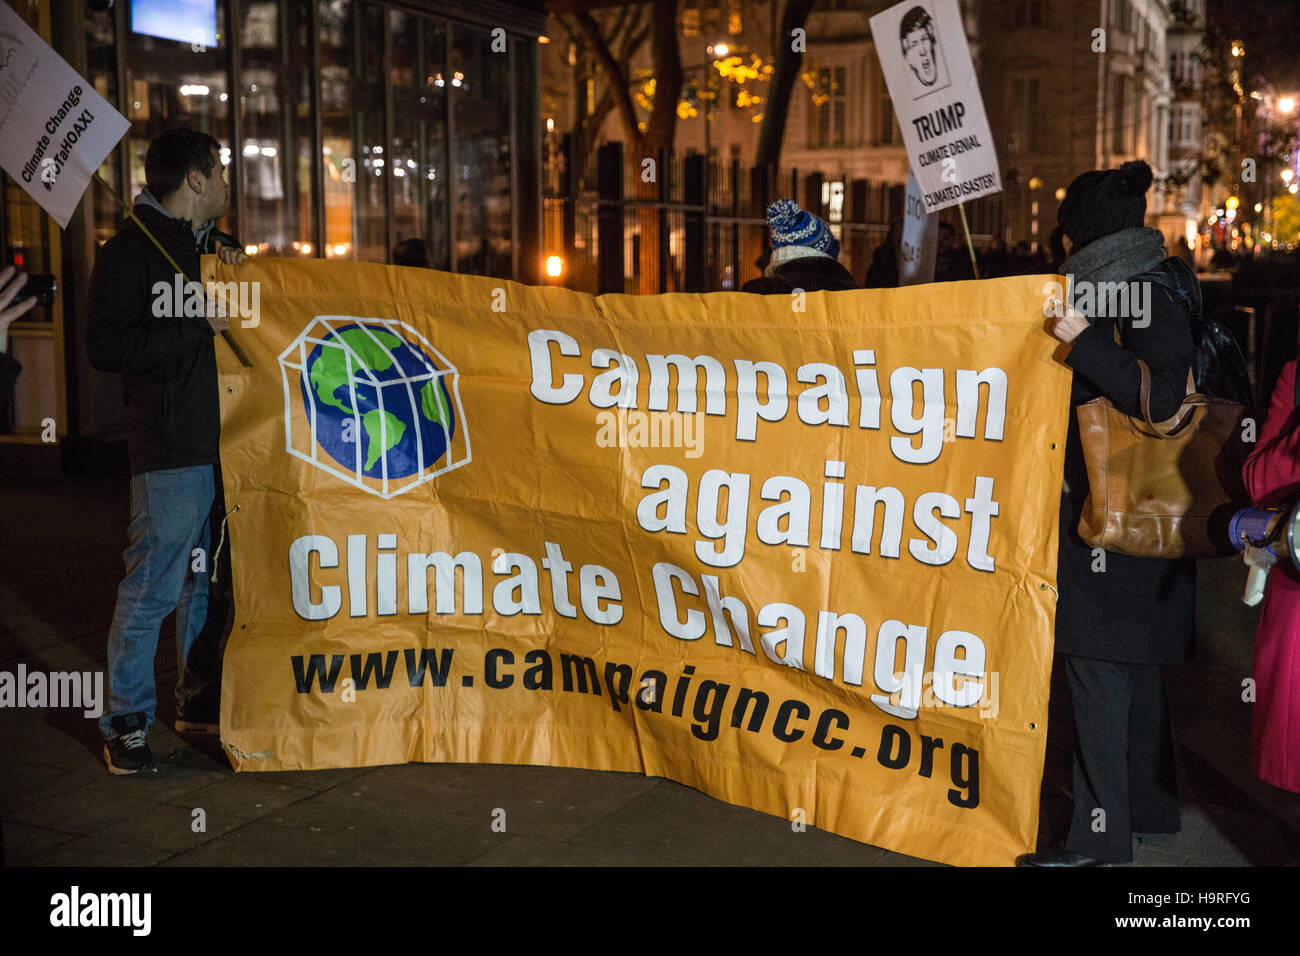 London, UK. 25th November, 2016. Activists from the Campaign Against Climate Change protest outside the US Embassy in solidarity with American climate activists preparing to campaign against President Elect Donald Trump and also in solidarity with those protesting at Standing Rock. Credit:  Mark Kerrison/Alamy Live News Stock Photo